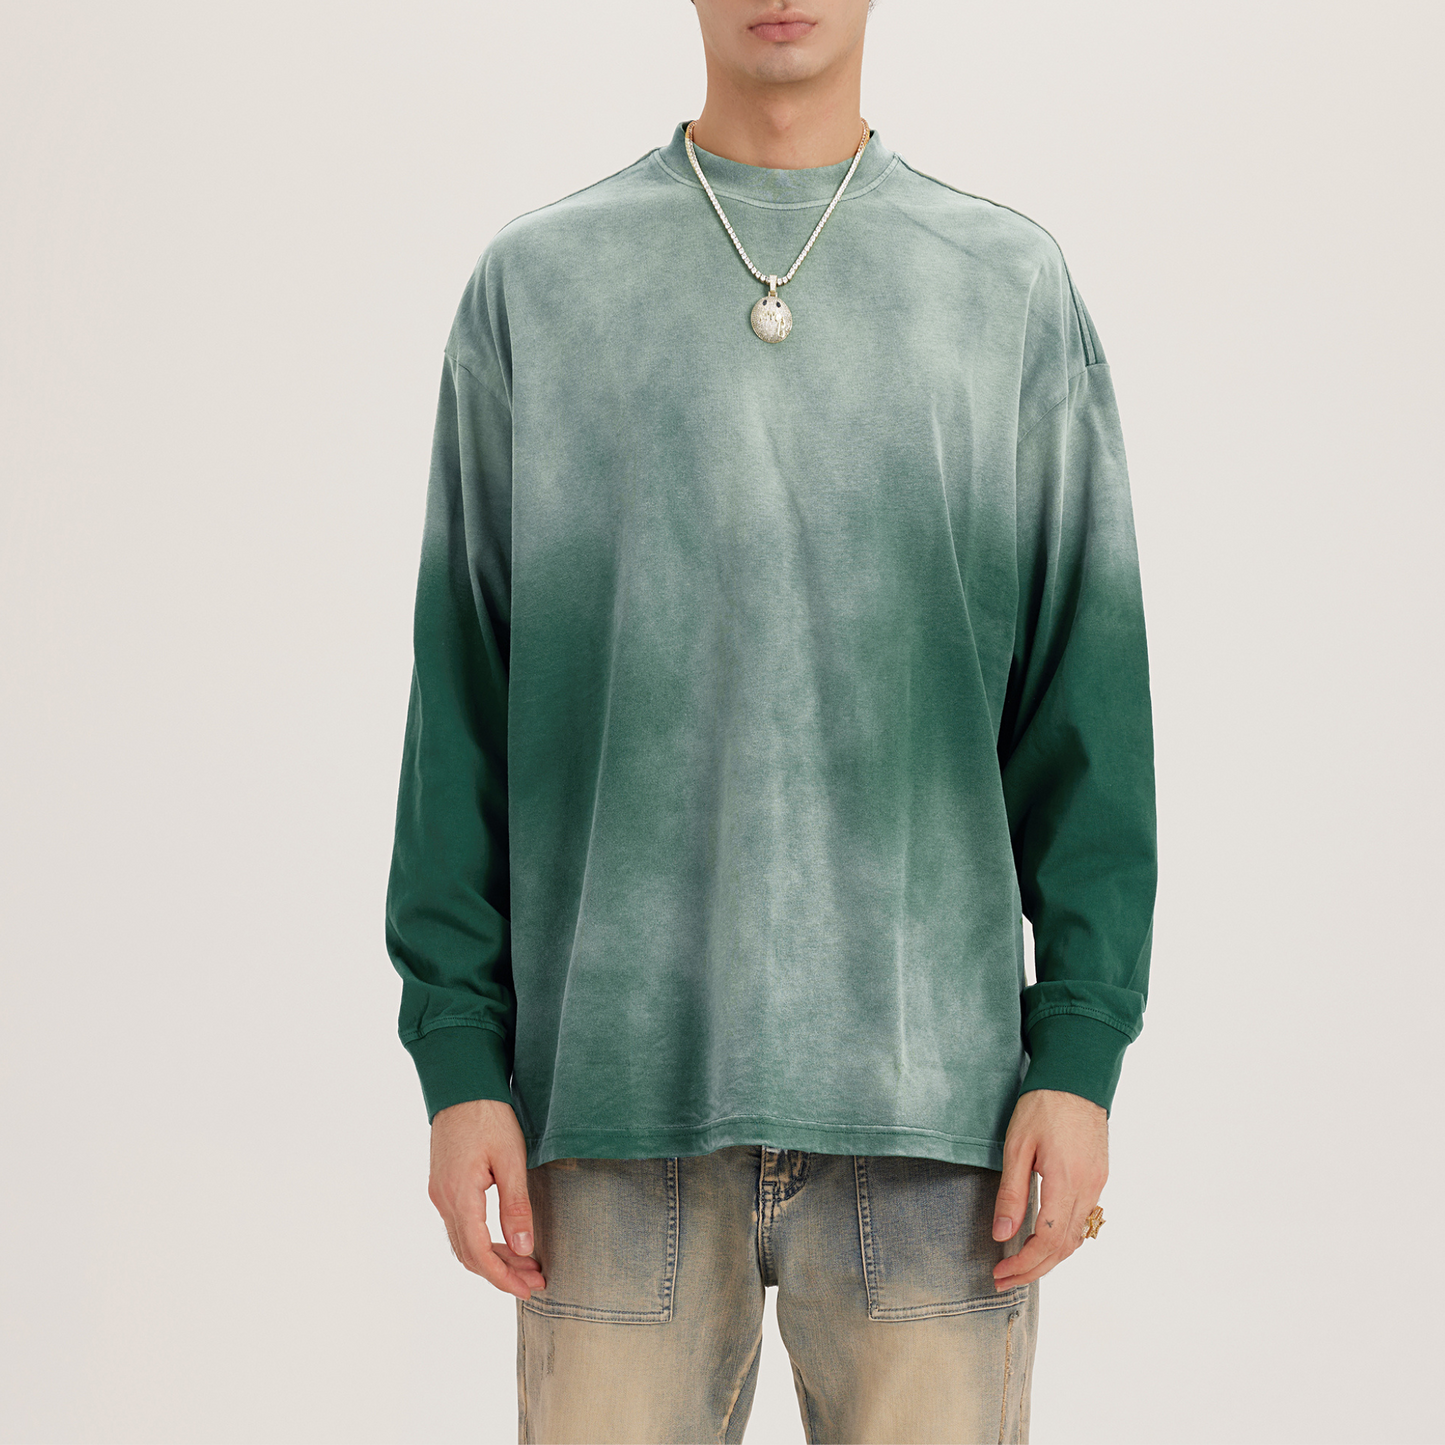 Washed faded dyed green crewneck long sleeves luxury streetwear